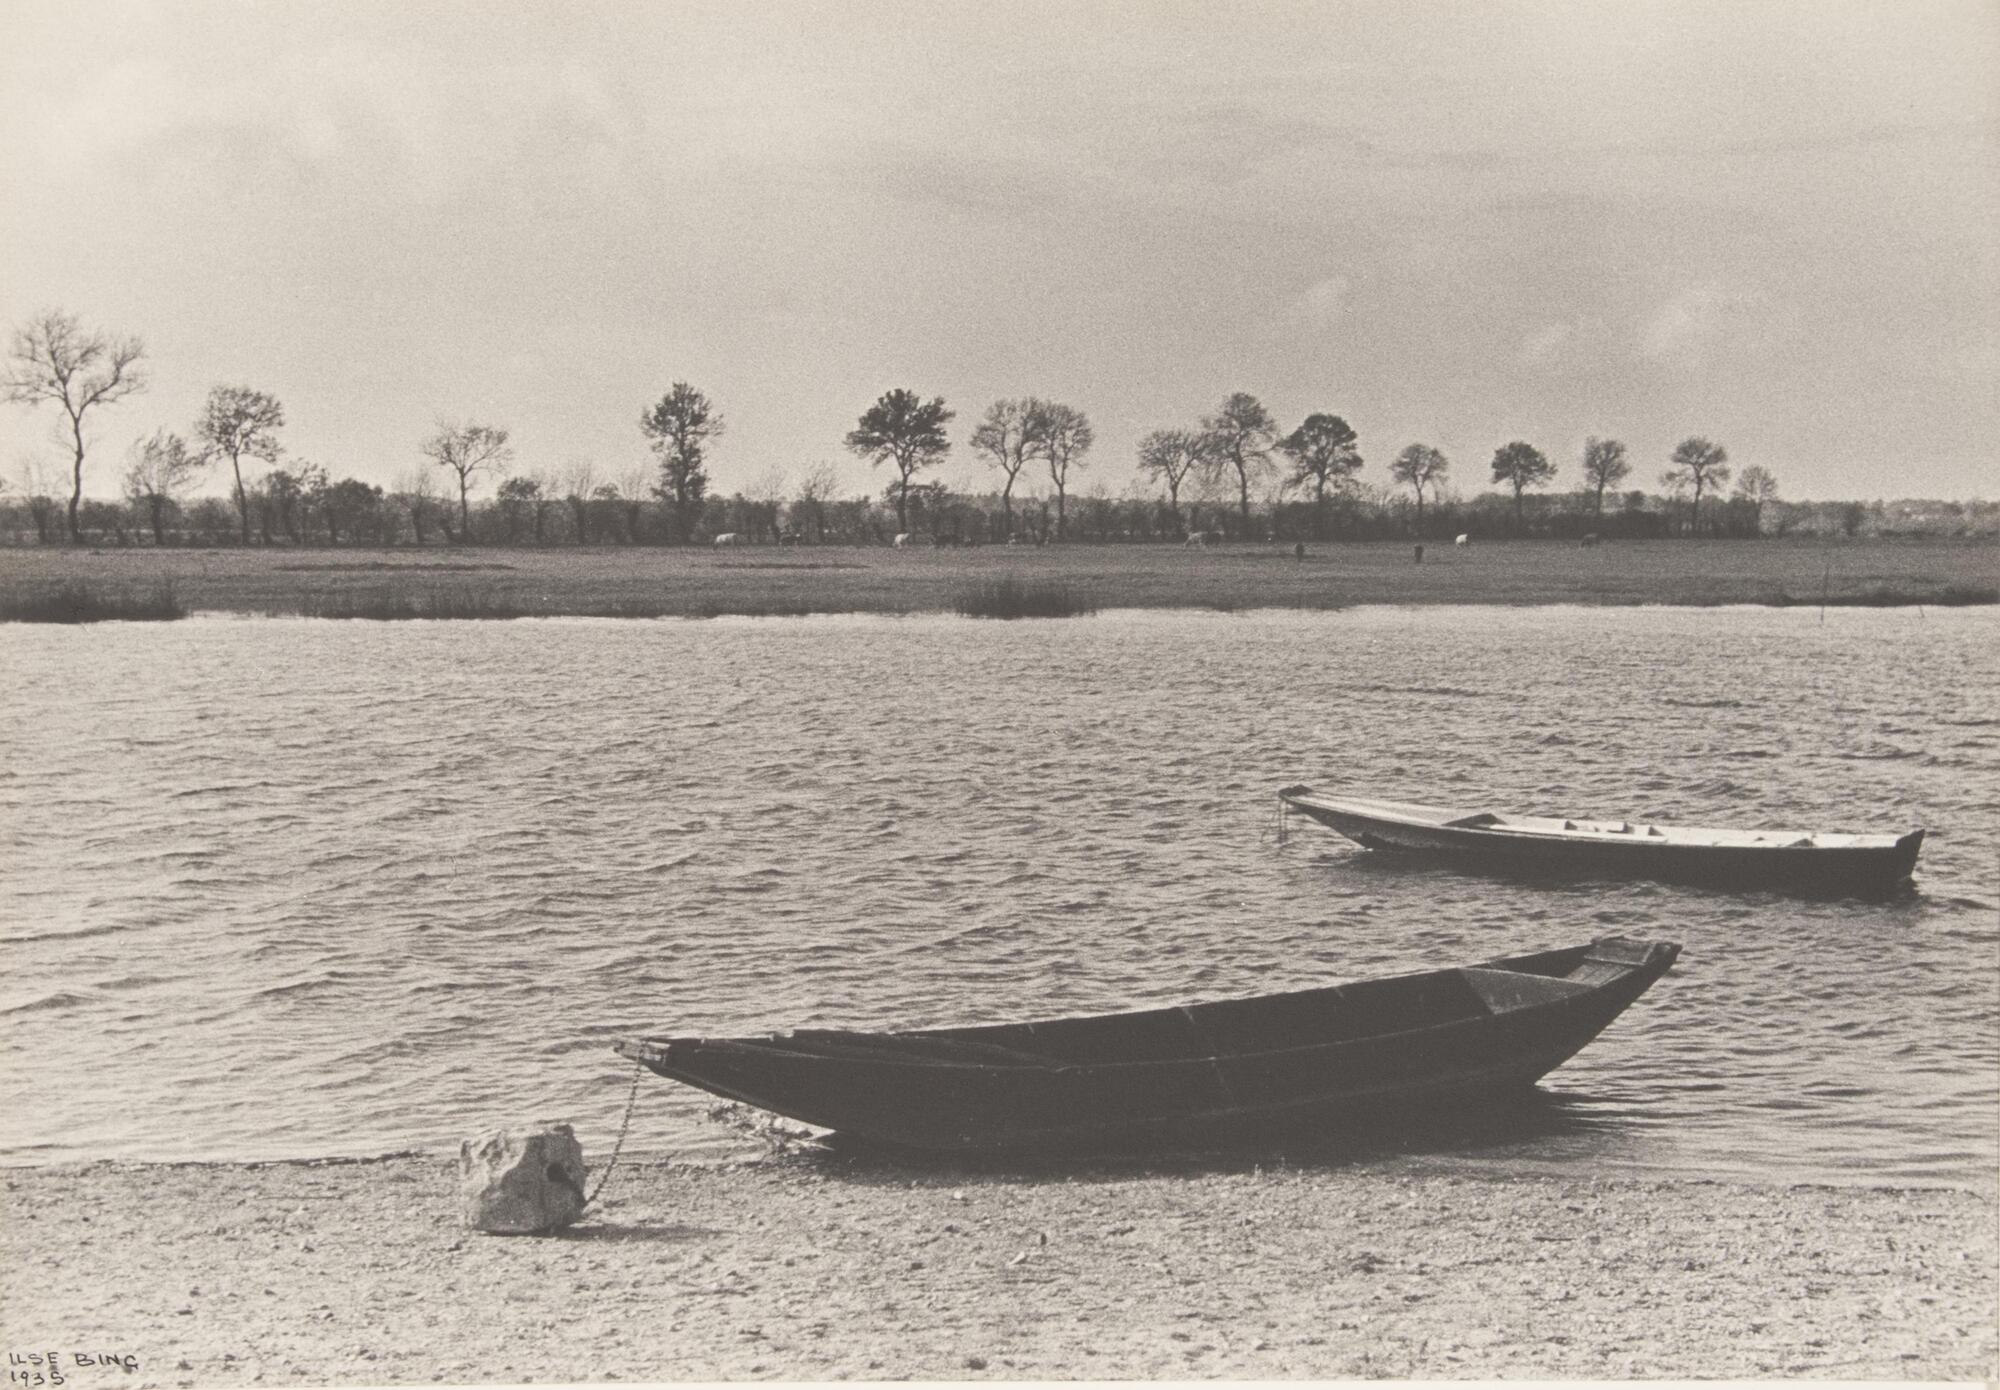 Two small boats tethered in the water and on shore of a river. The opposite tree-lined bank is also seen.